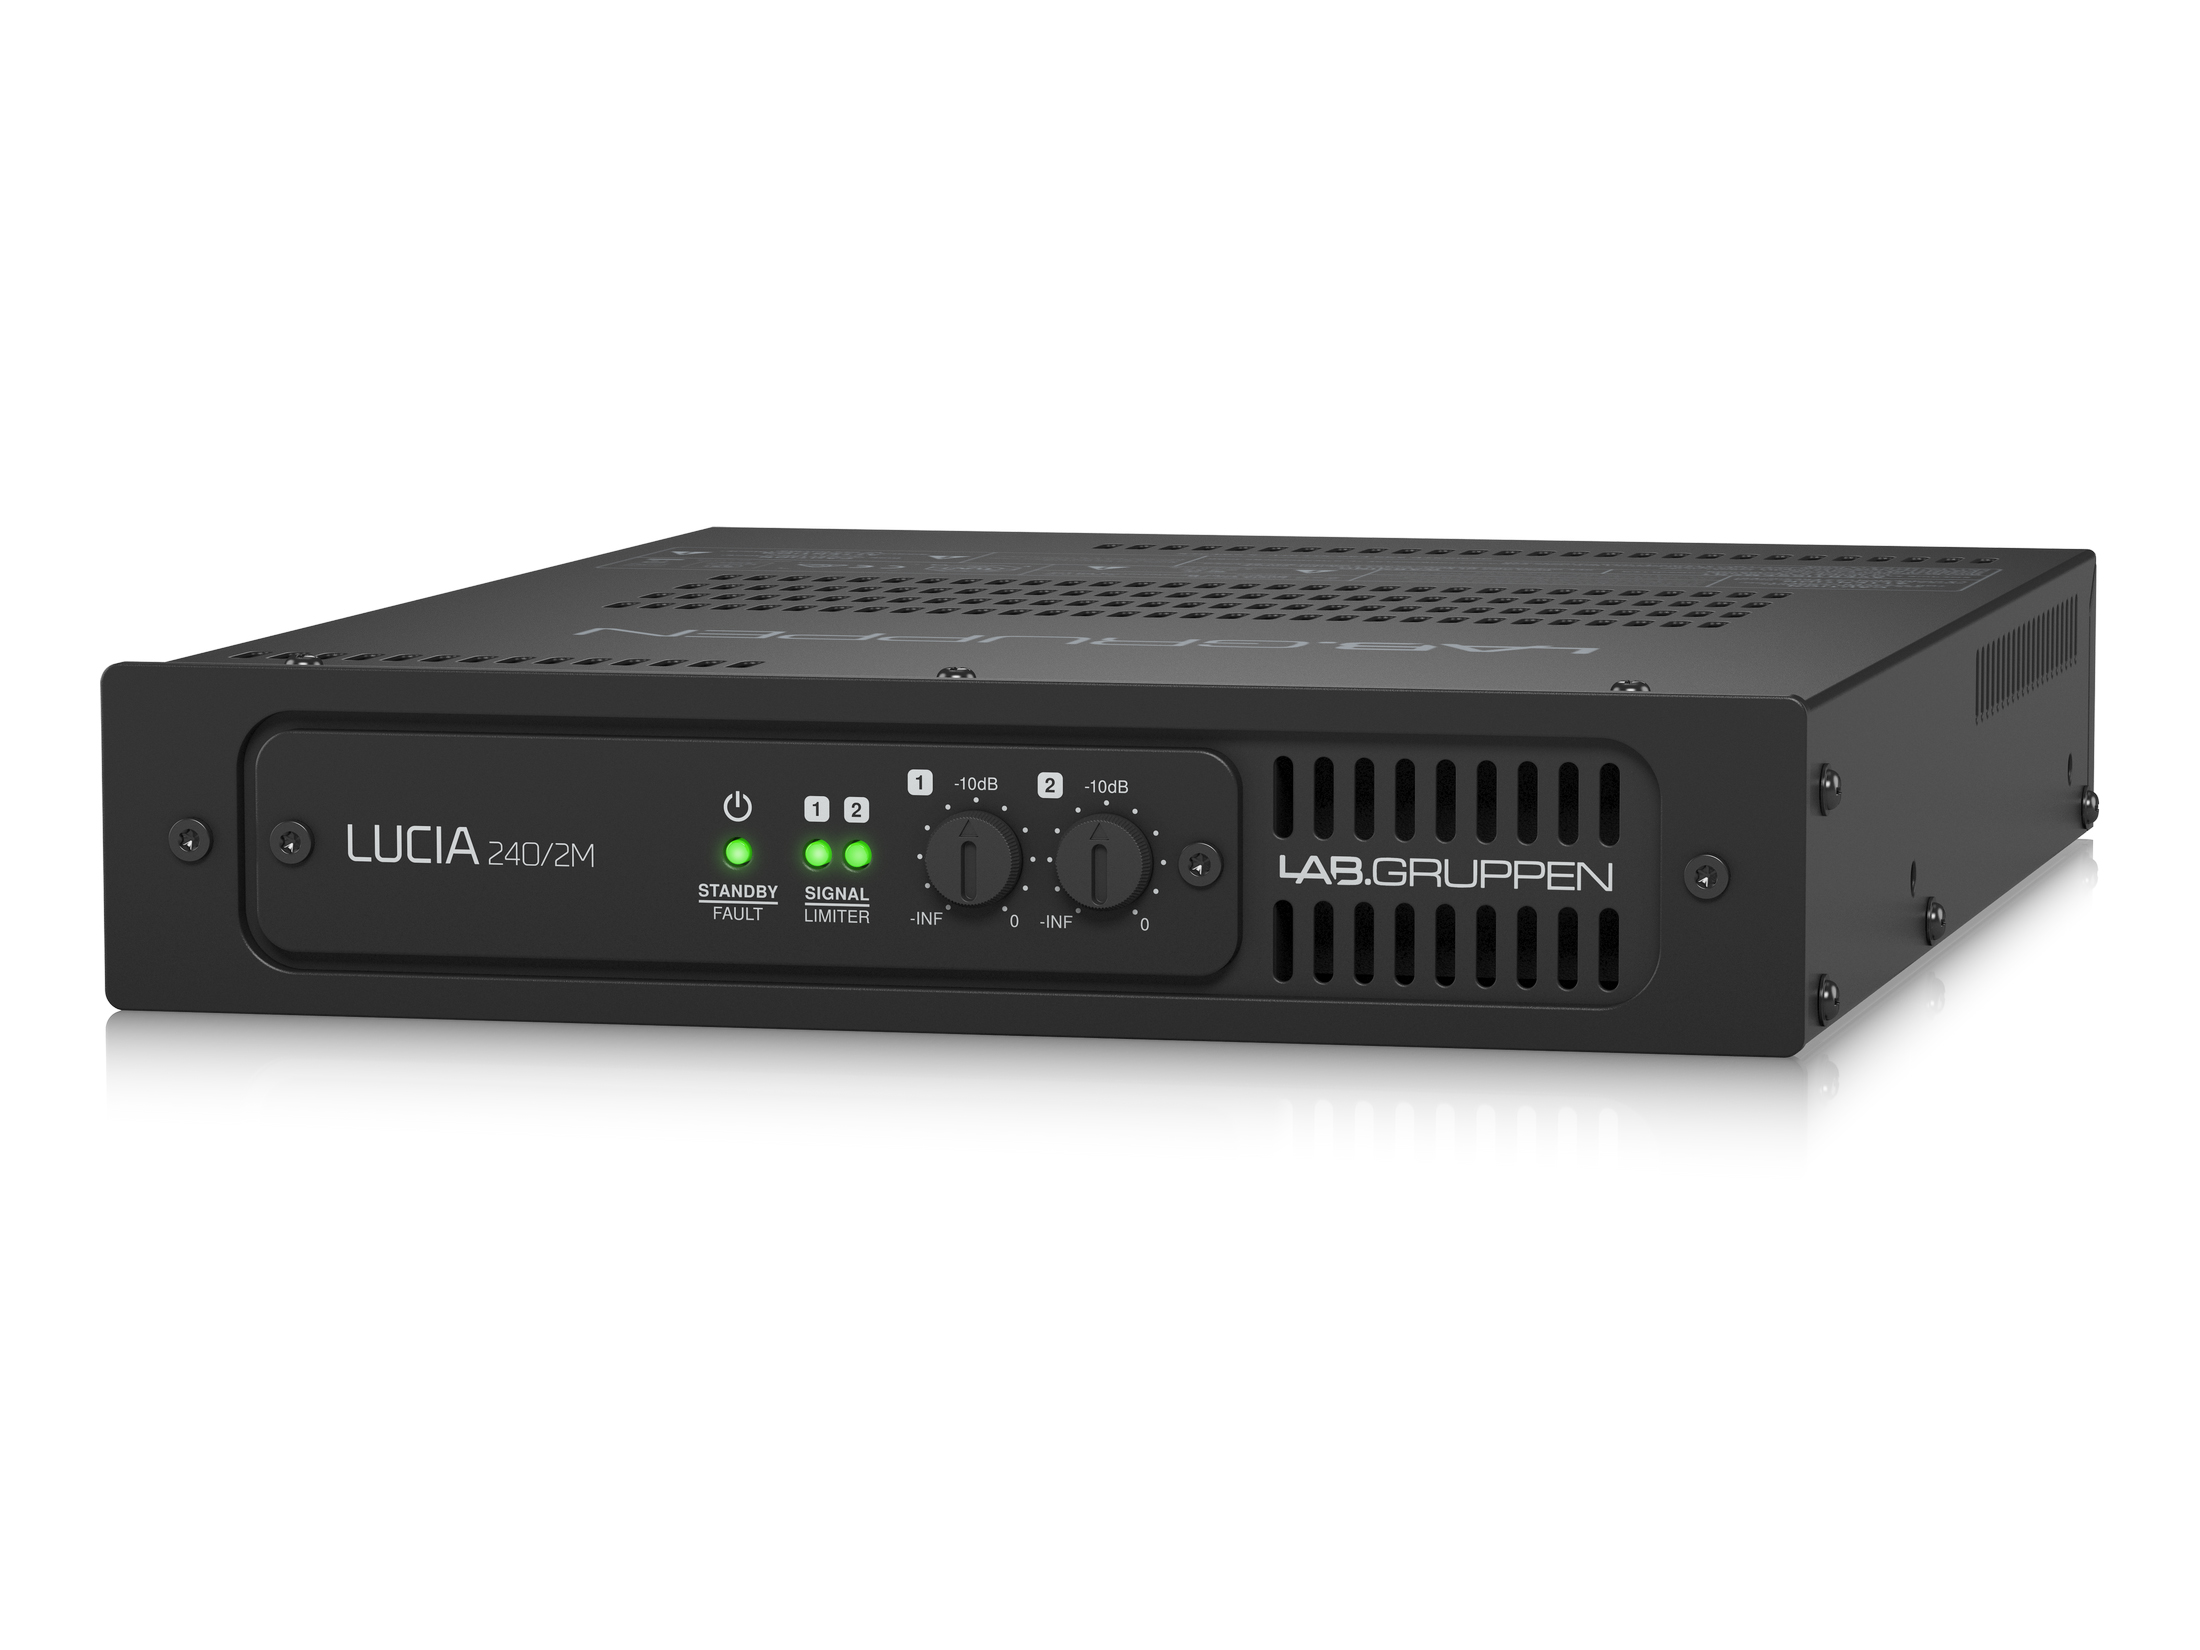 LUCIA 240/2M Compact 2 x 120 W Matrix Amplifier for Installation Applications by Lab.gruppen